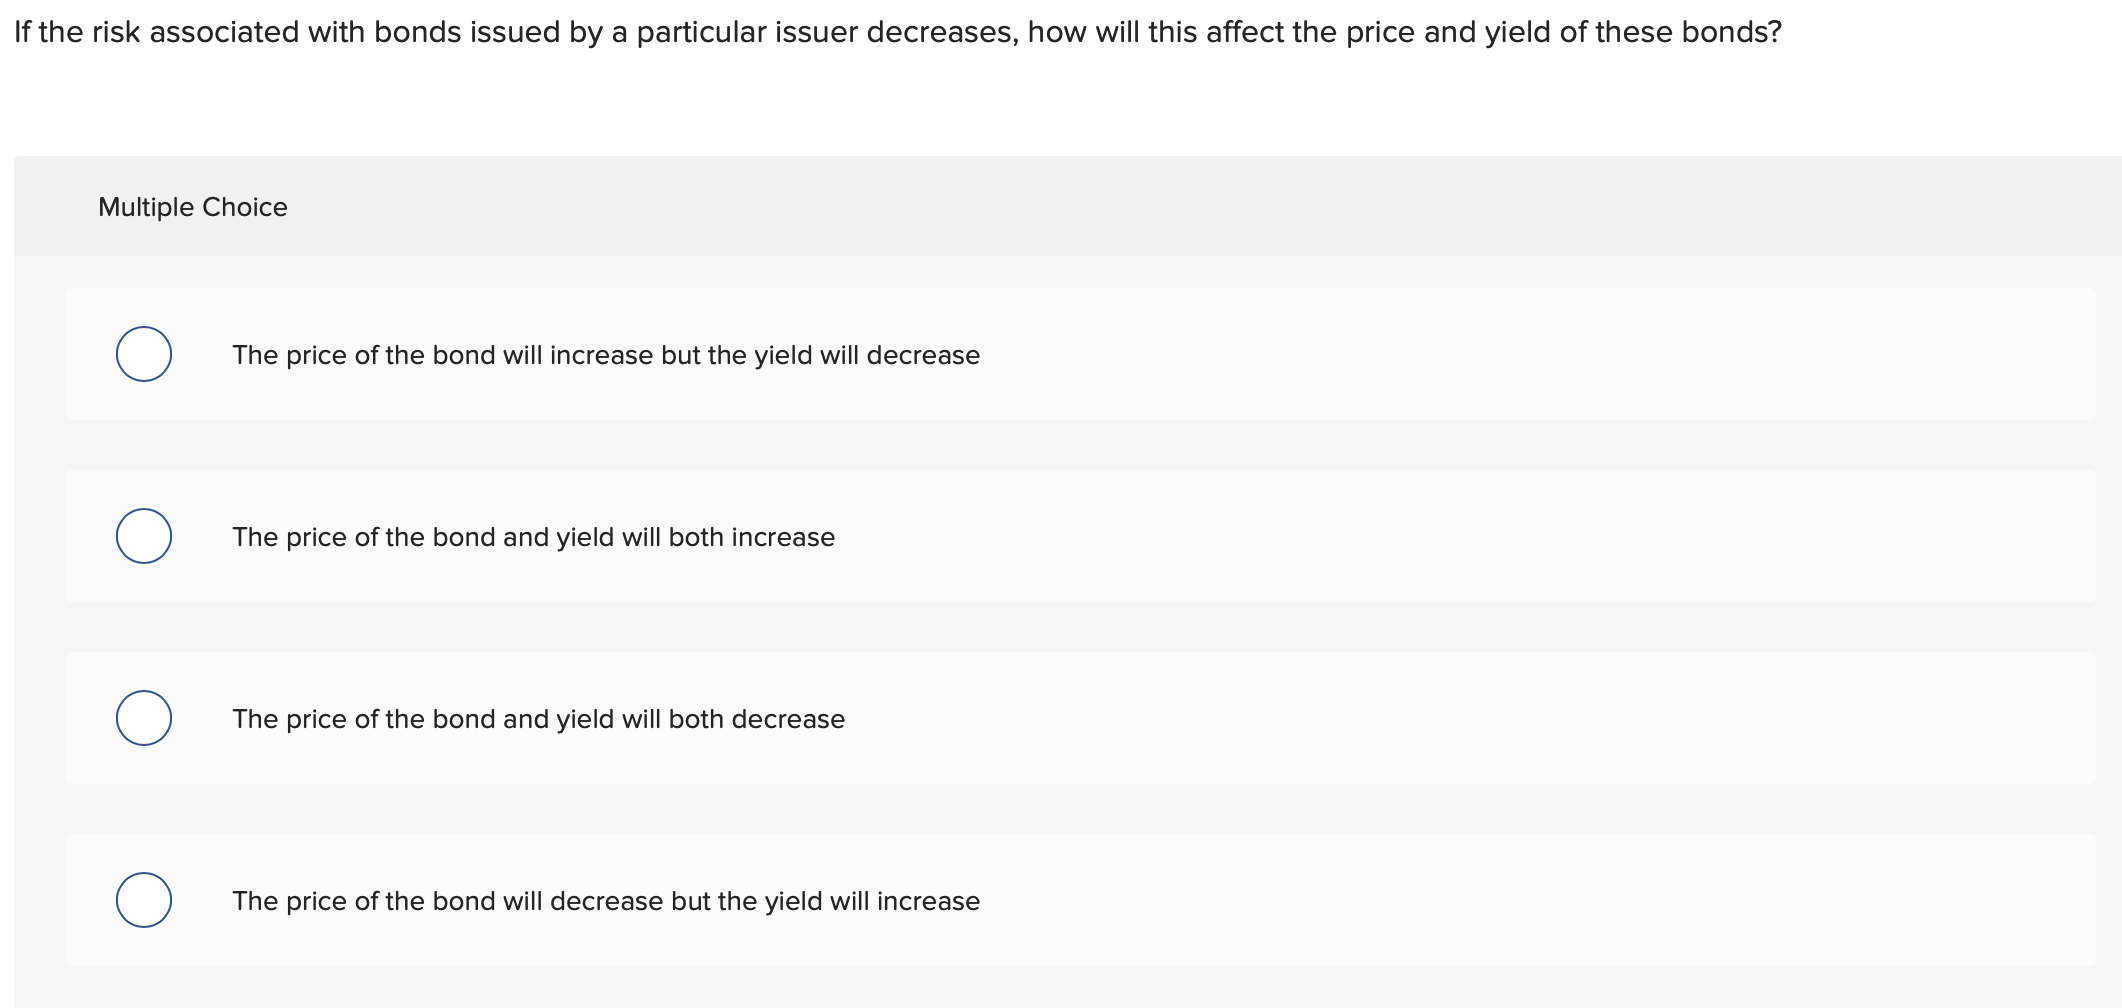 If the risk associated with bonds issued by a particular issuer decreases, how will this affect the price and yield of these bonds?
Multiple Choice
The price of the bond will increase but the yield will decrease
The price of the bond and yield will both increase
The price of the bond and yield will both decrease
The price of the bond will decrease but the yield will increase
